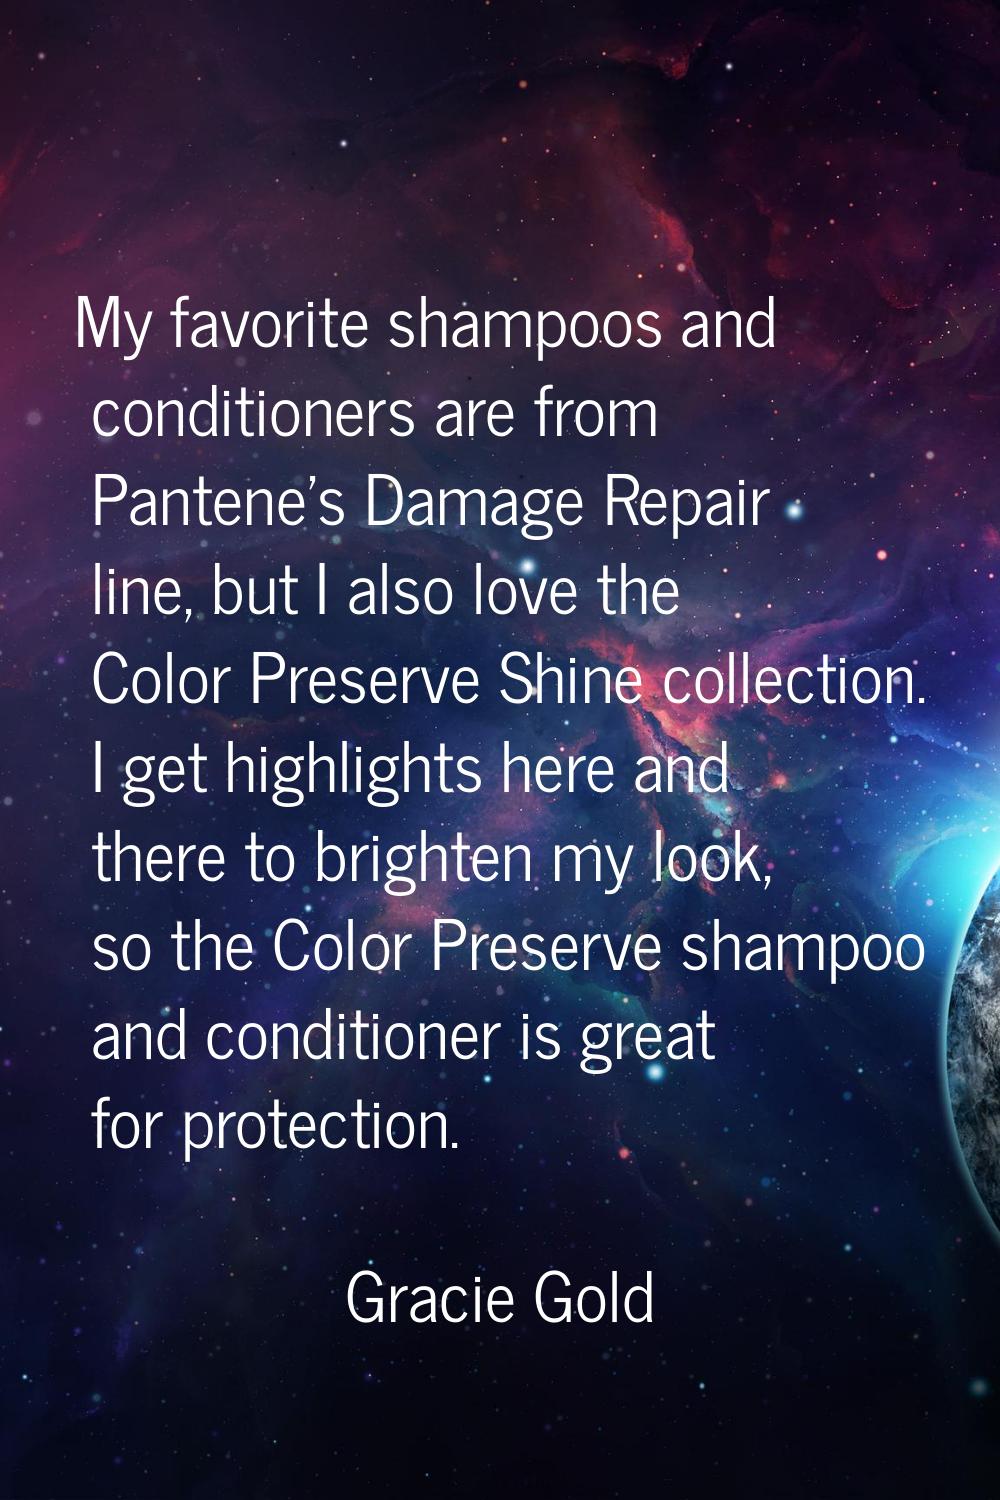 My favorite shampoos and conditioners are from Pantene's Damage Repair line, but I also love the Co